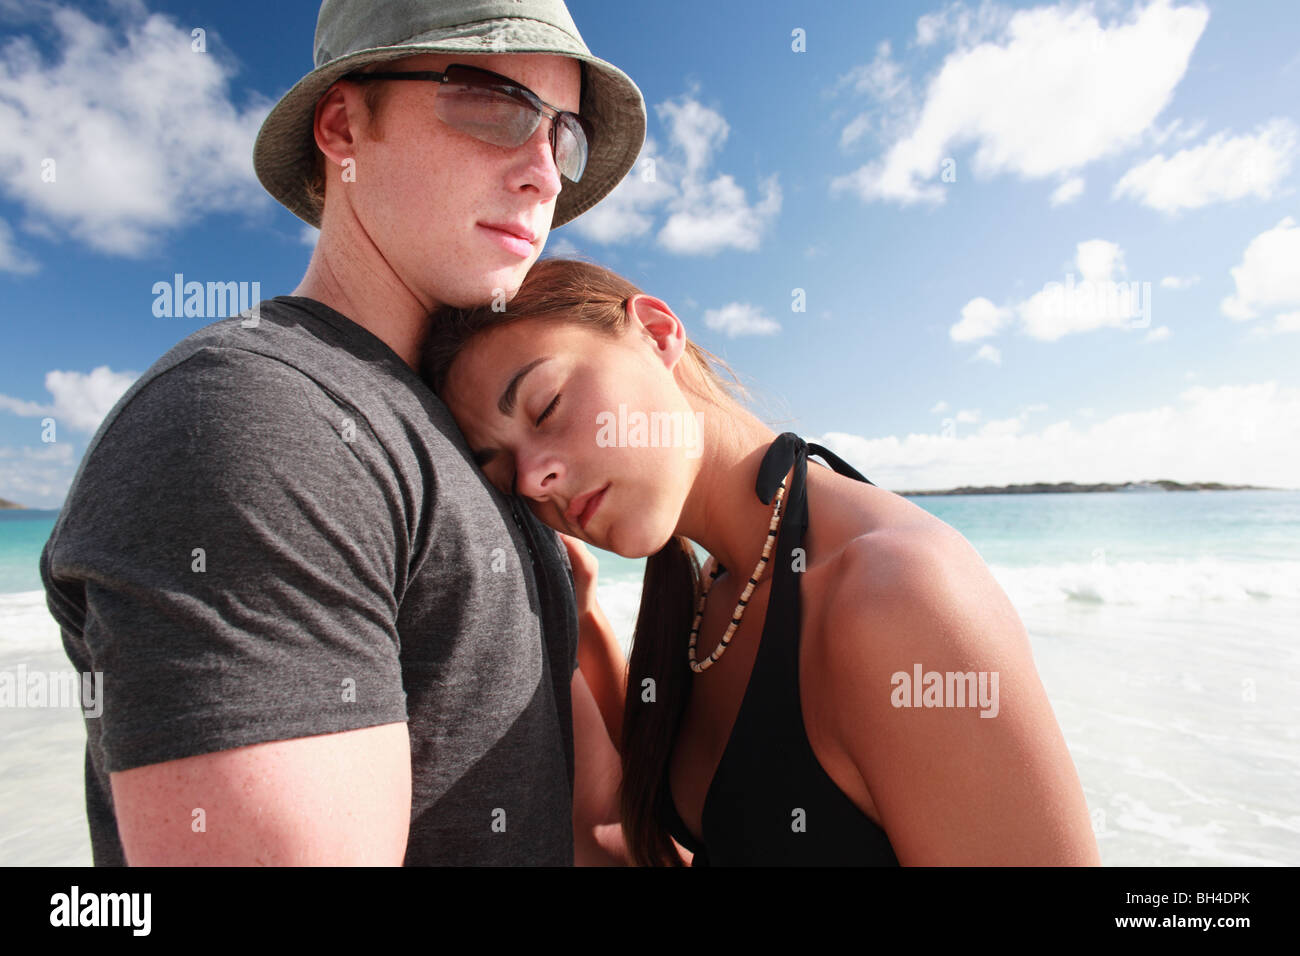 Young couple embracing on a beach Stock Photo